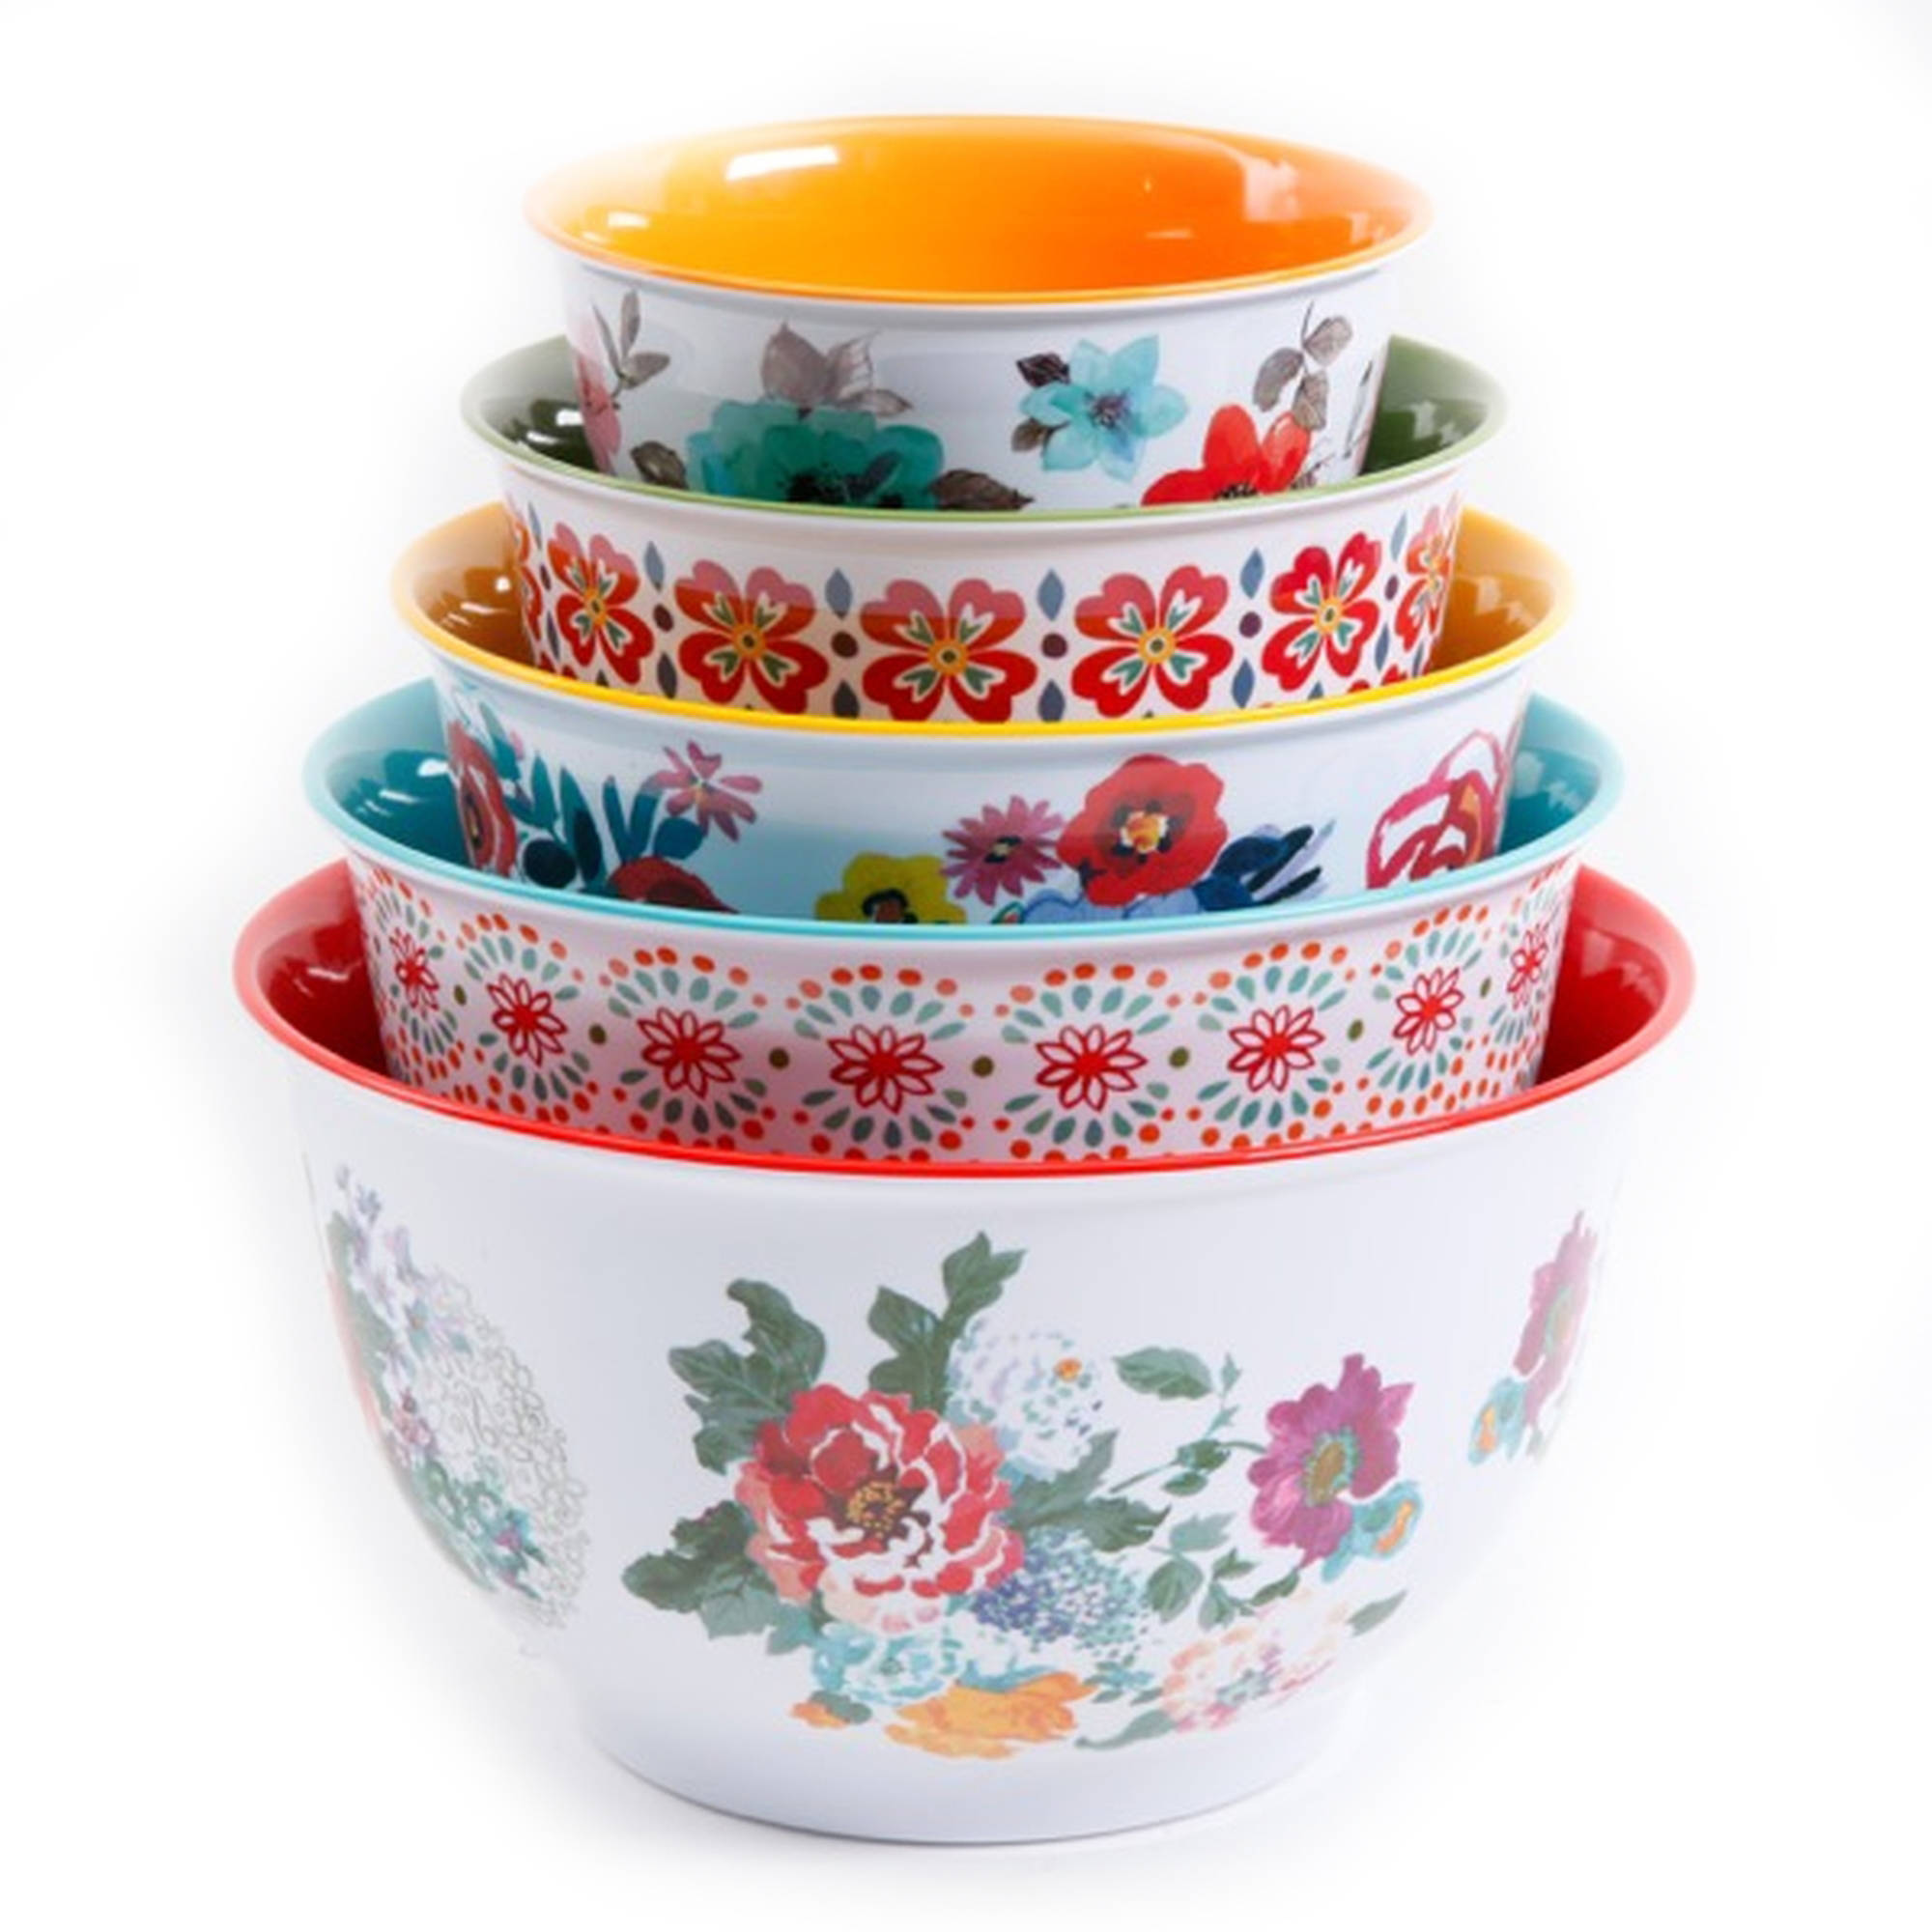 The Pioneer Woman Country Garden Melamine Mixing Bowl Set, 10-Piece Set - image 3 of 7